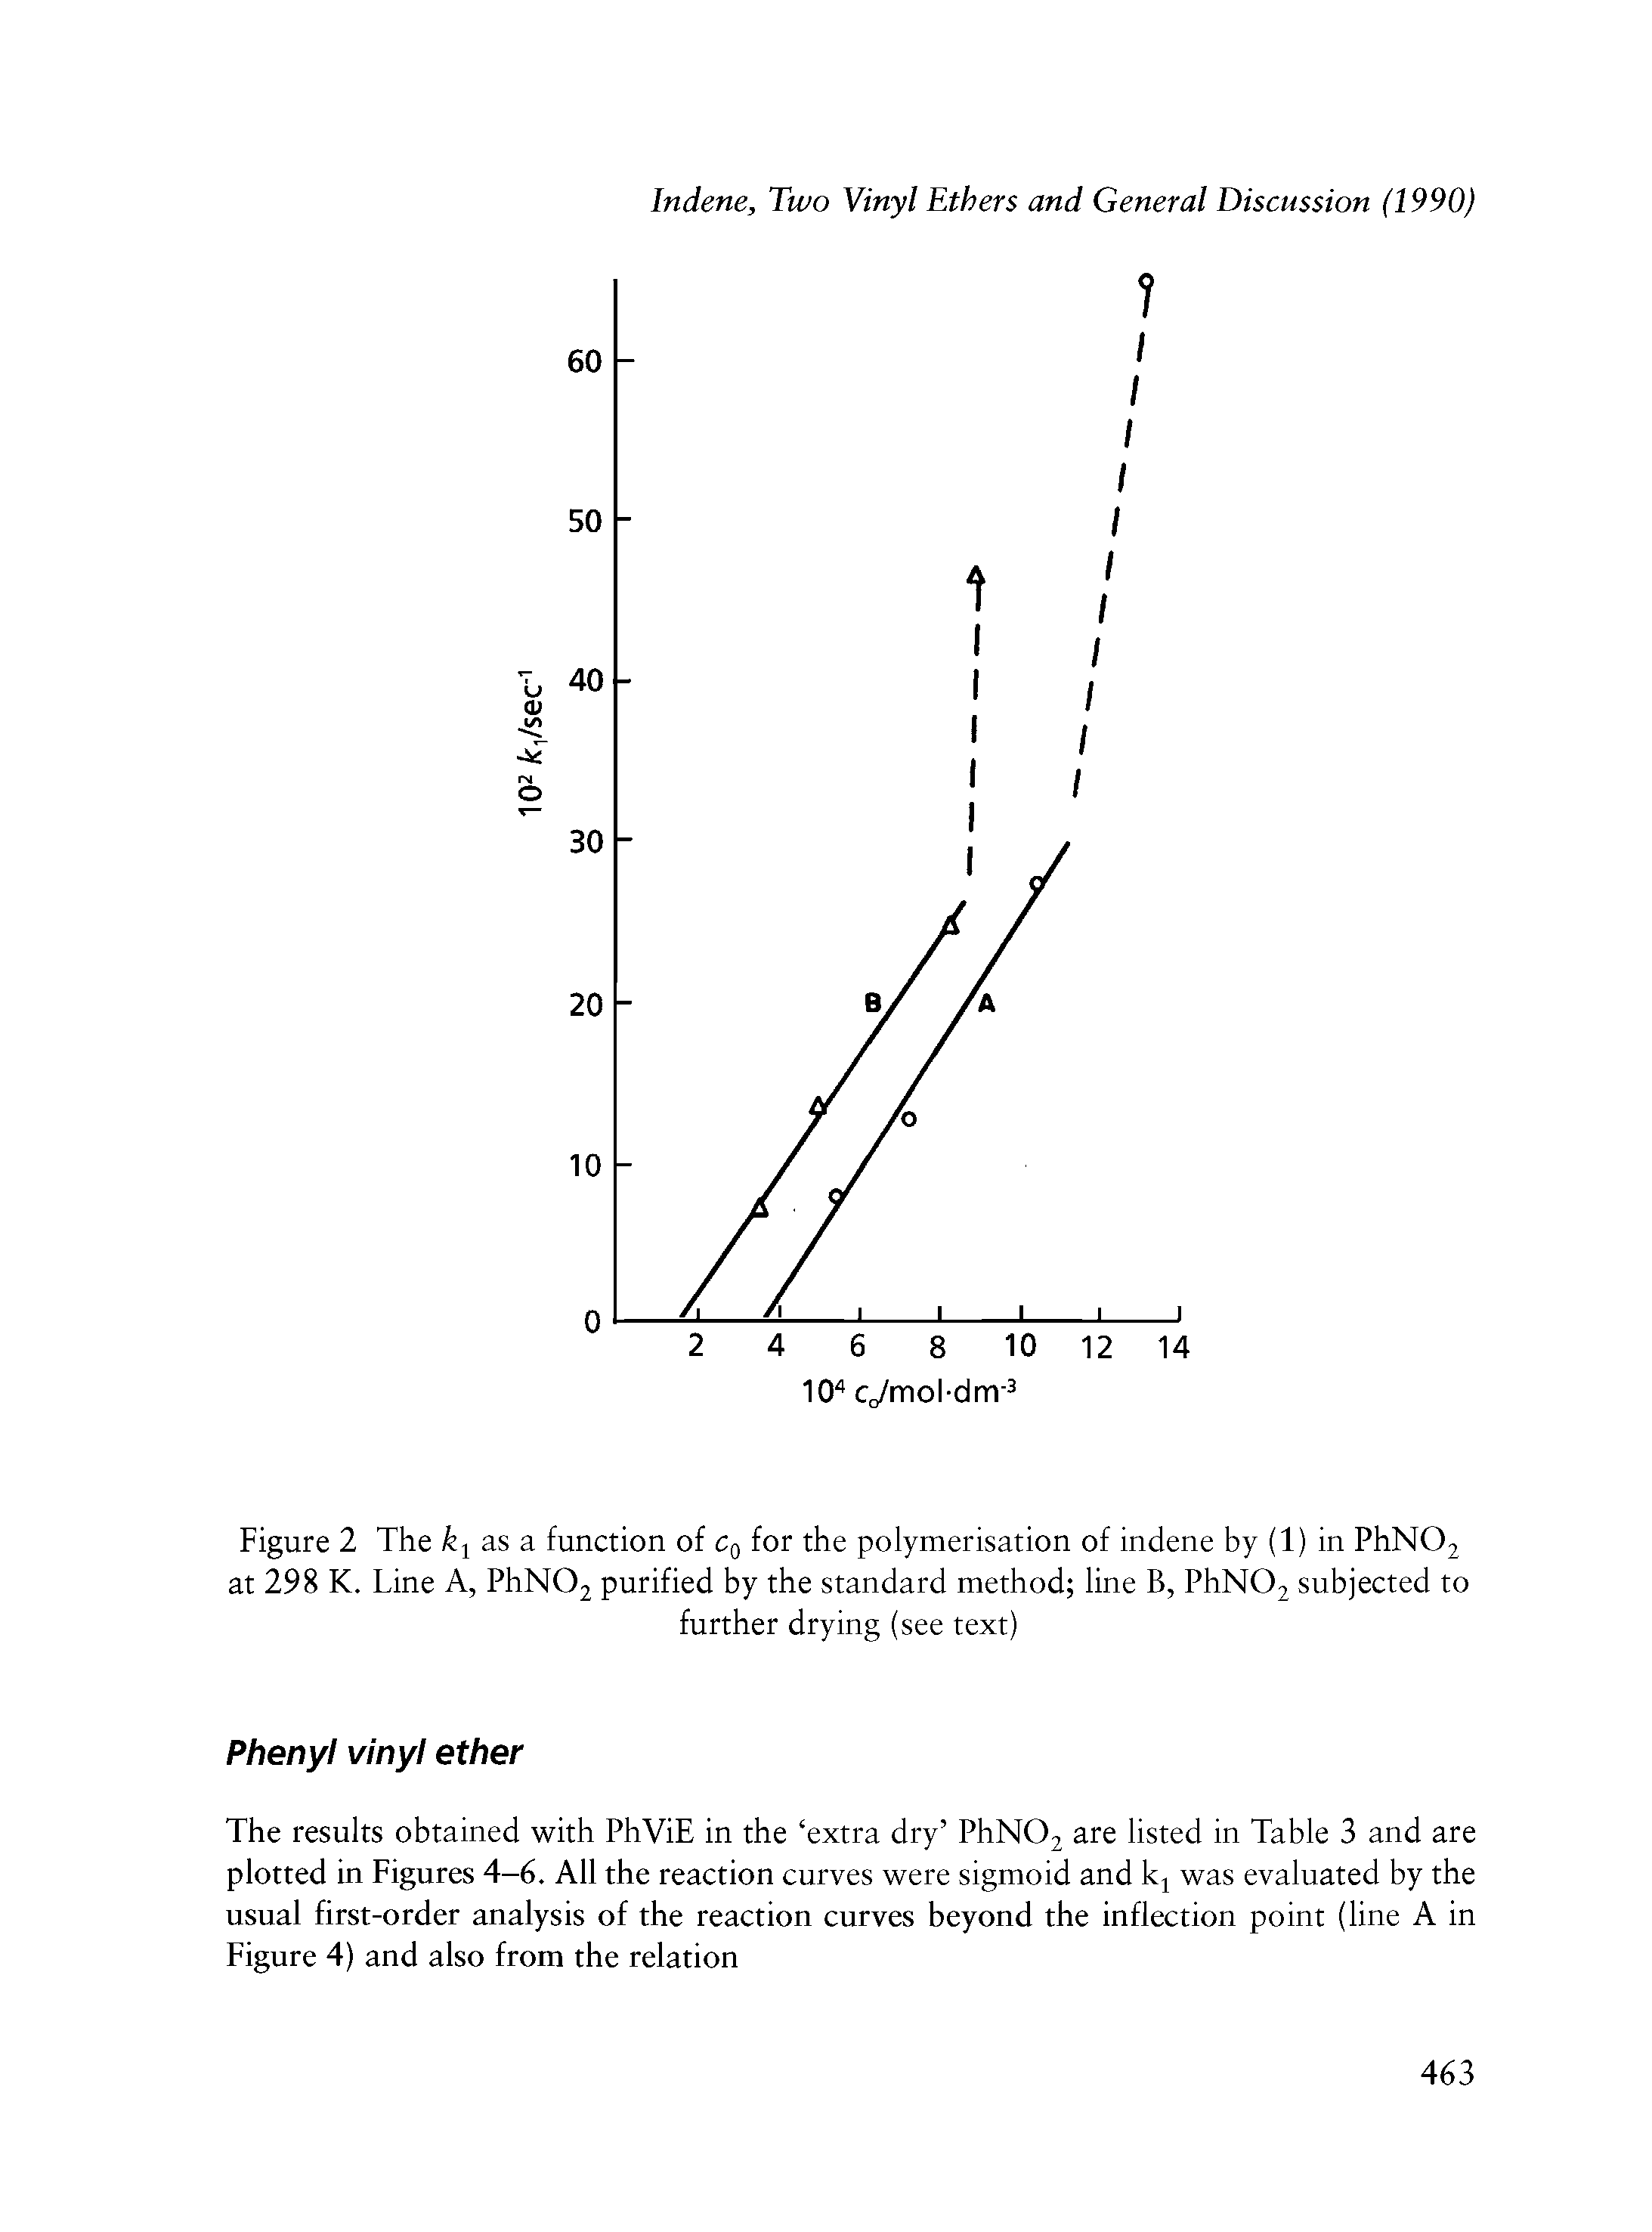 Figure 2 The k1 as a function of c0 for the polymerisation of indene by (1) in PhN02 at 298 K. Line A, PhN02 purified by the standard method line B, PhNOz subjected to...